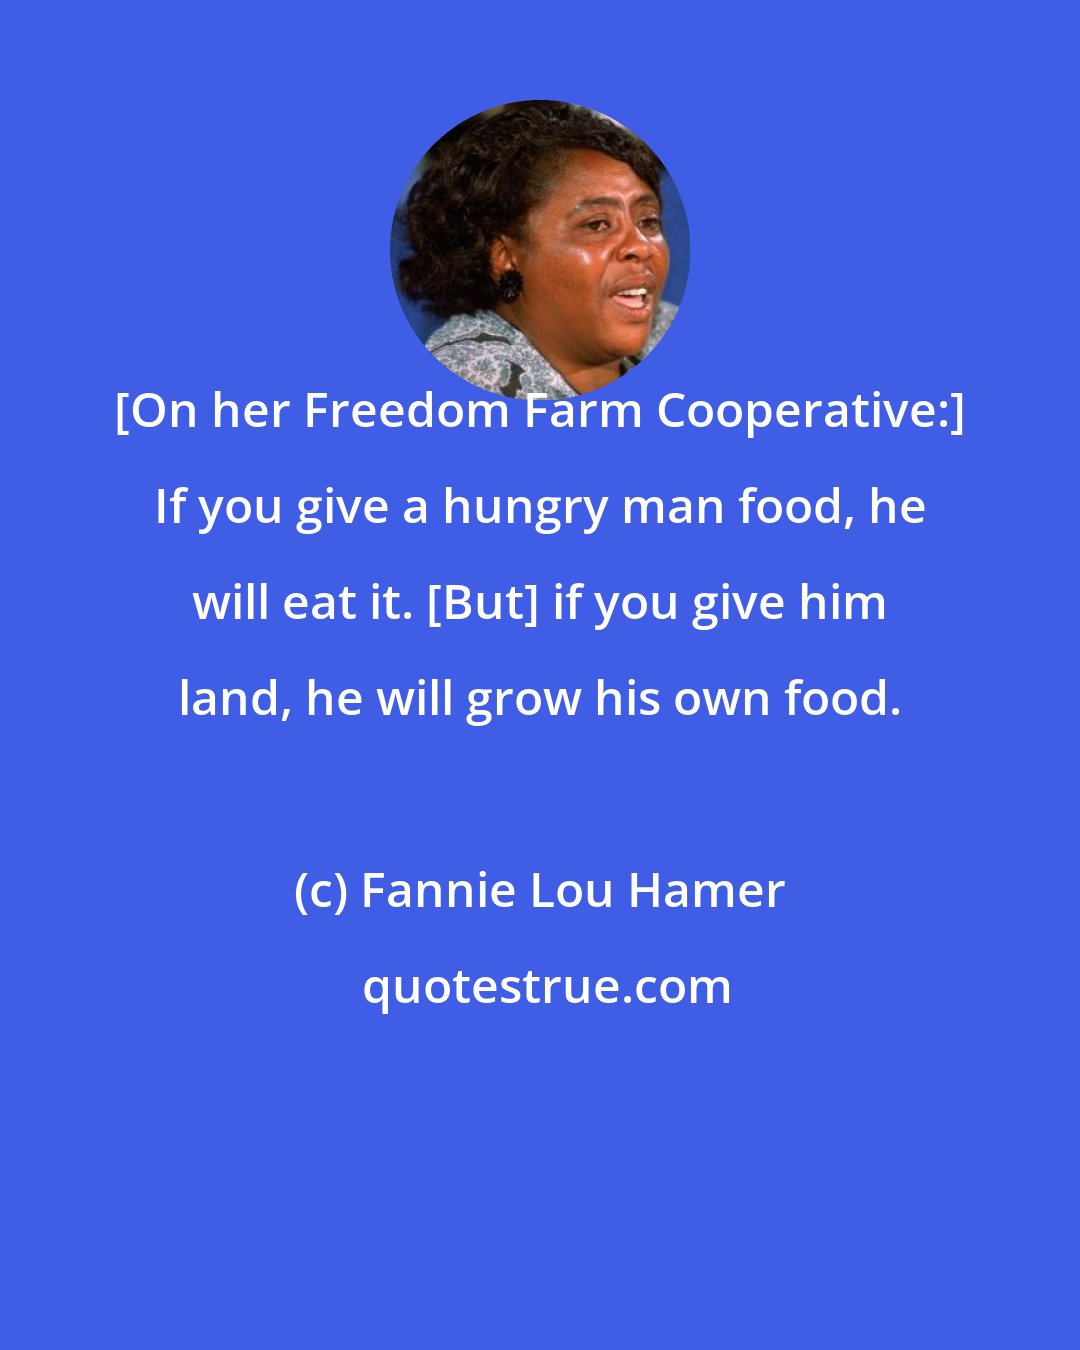 Fannie Lou Hamer: [On her Freedom Farm Cooperative:] If you give a hungry man food, he will eat it. [But] if you give him land, he will grow his own food.